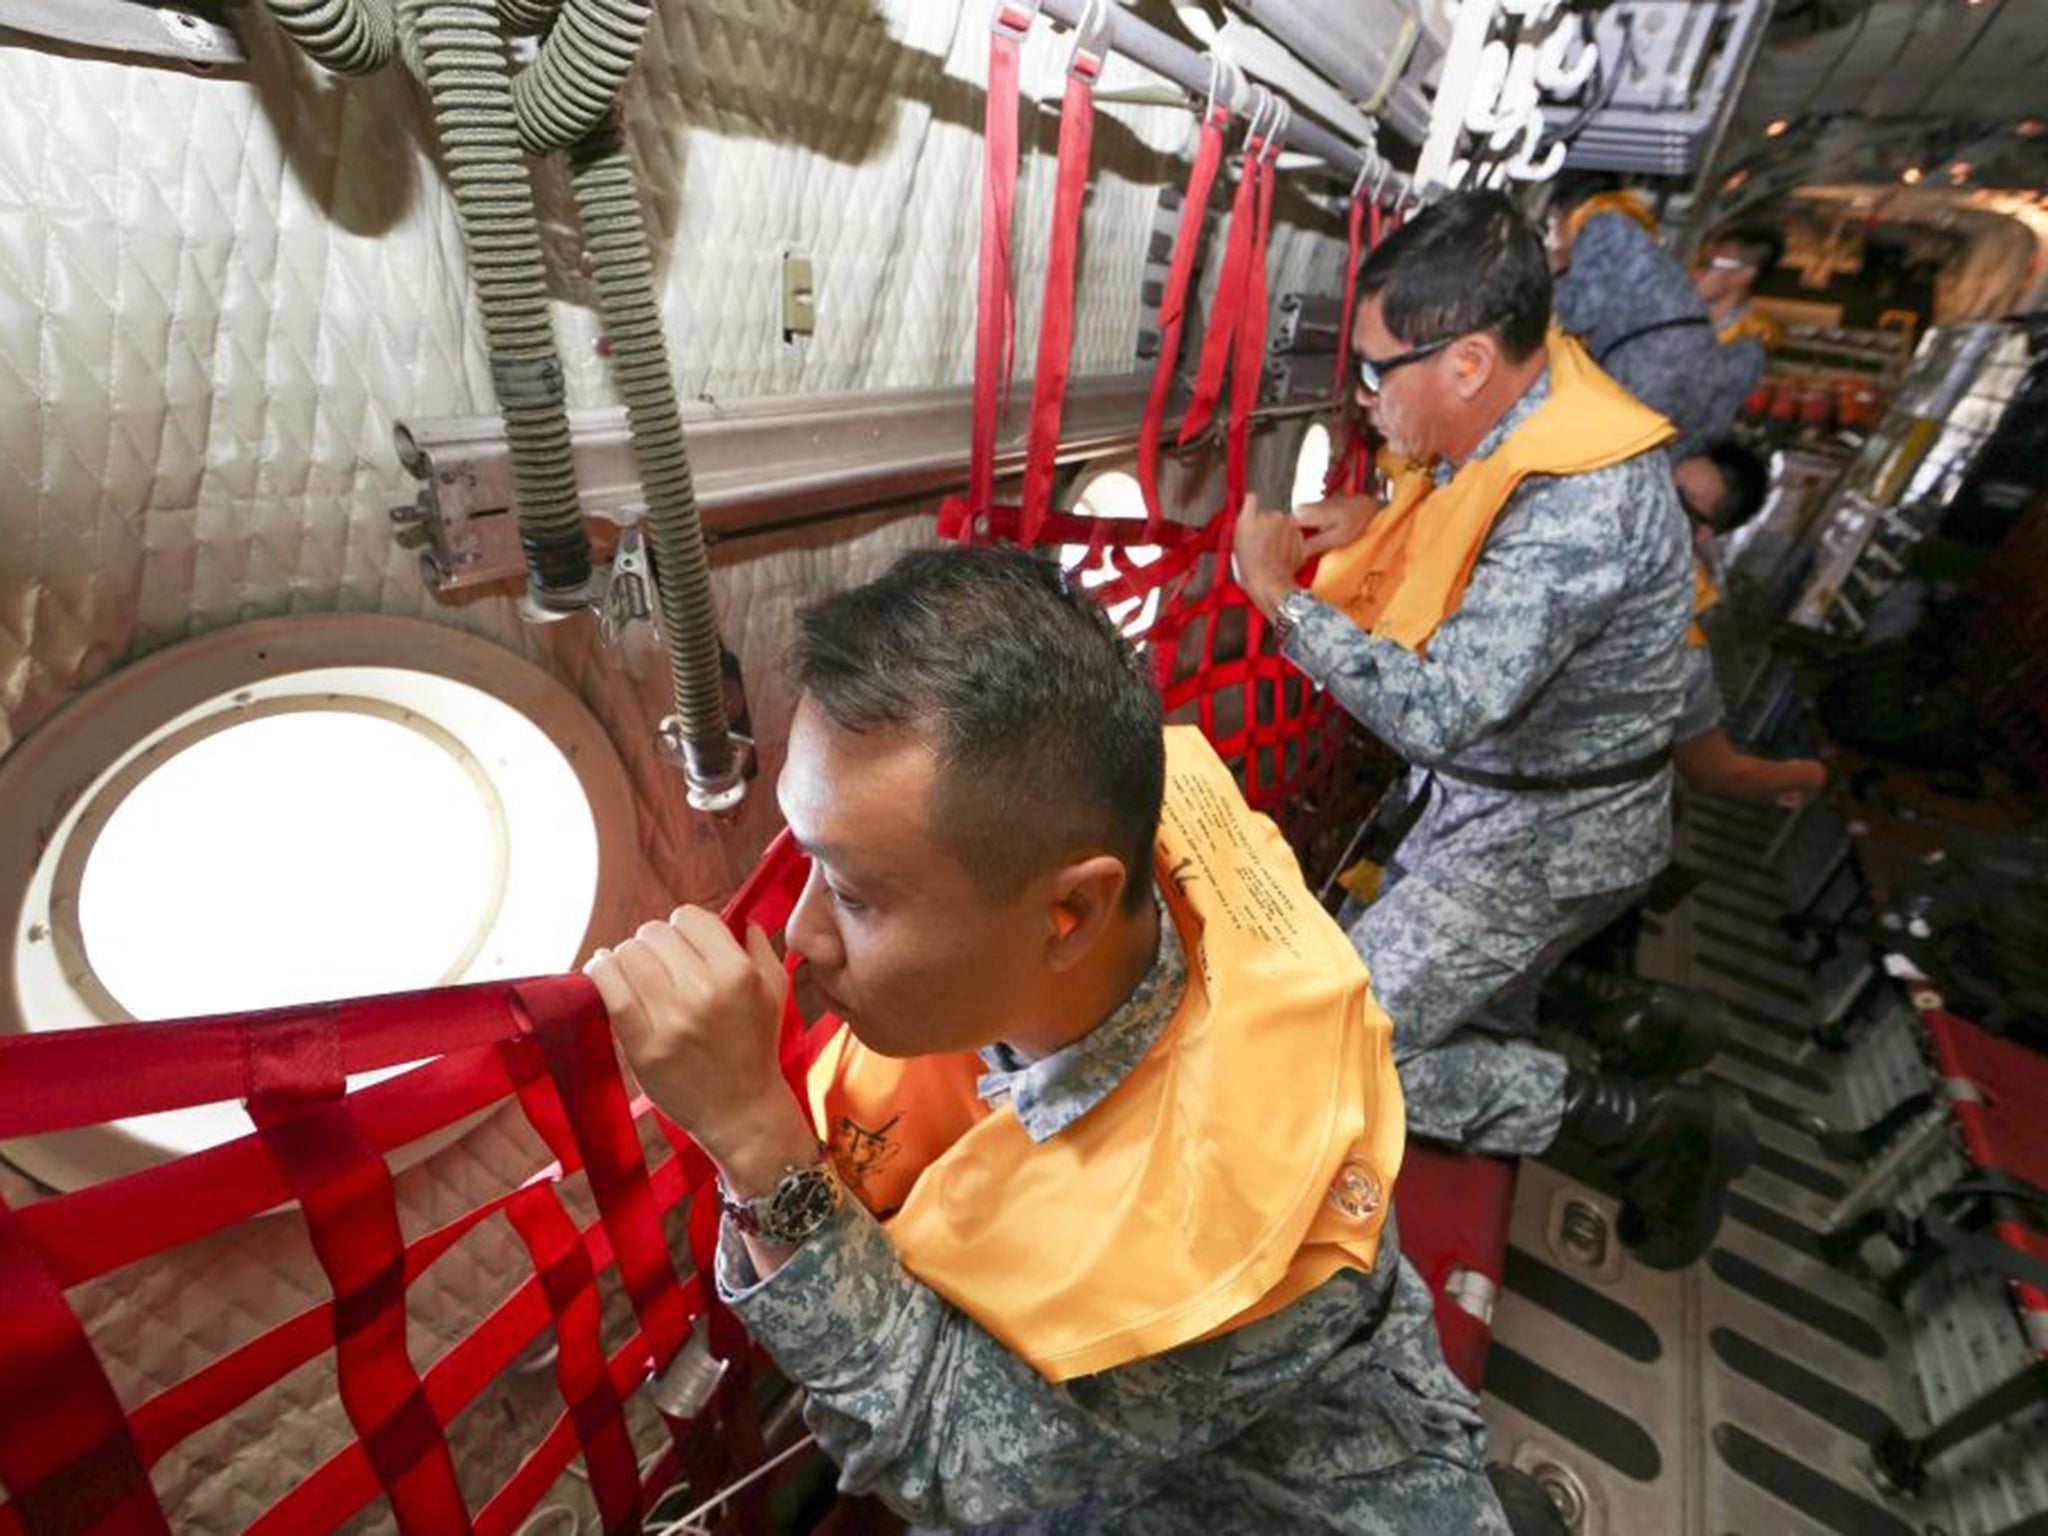 Personnel from Singapore's Air Force on board a C-130 Hercules during a search and rescue operation for the missing AirAsia flight QZ8501